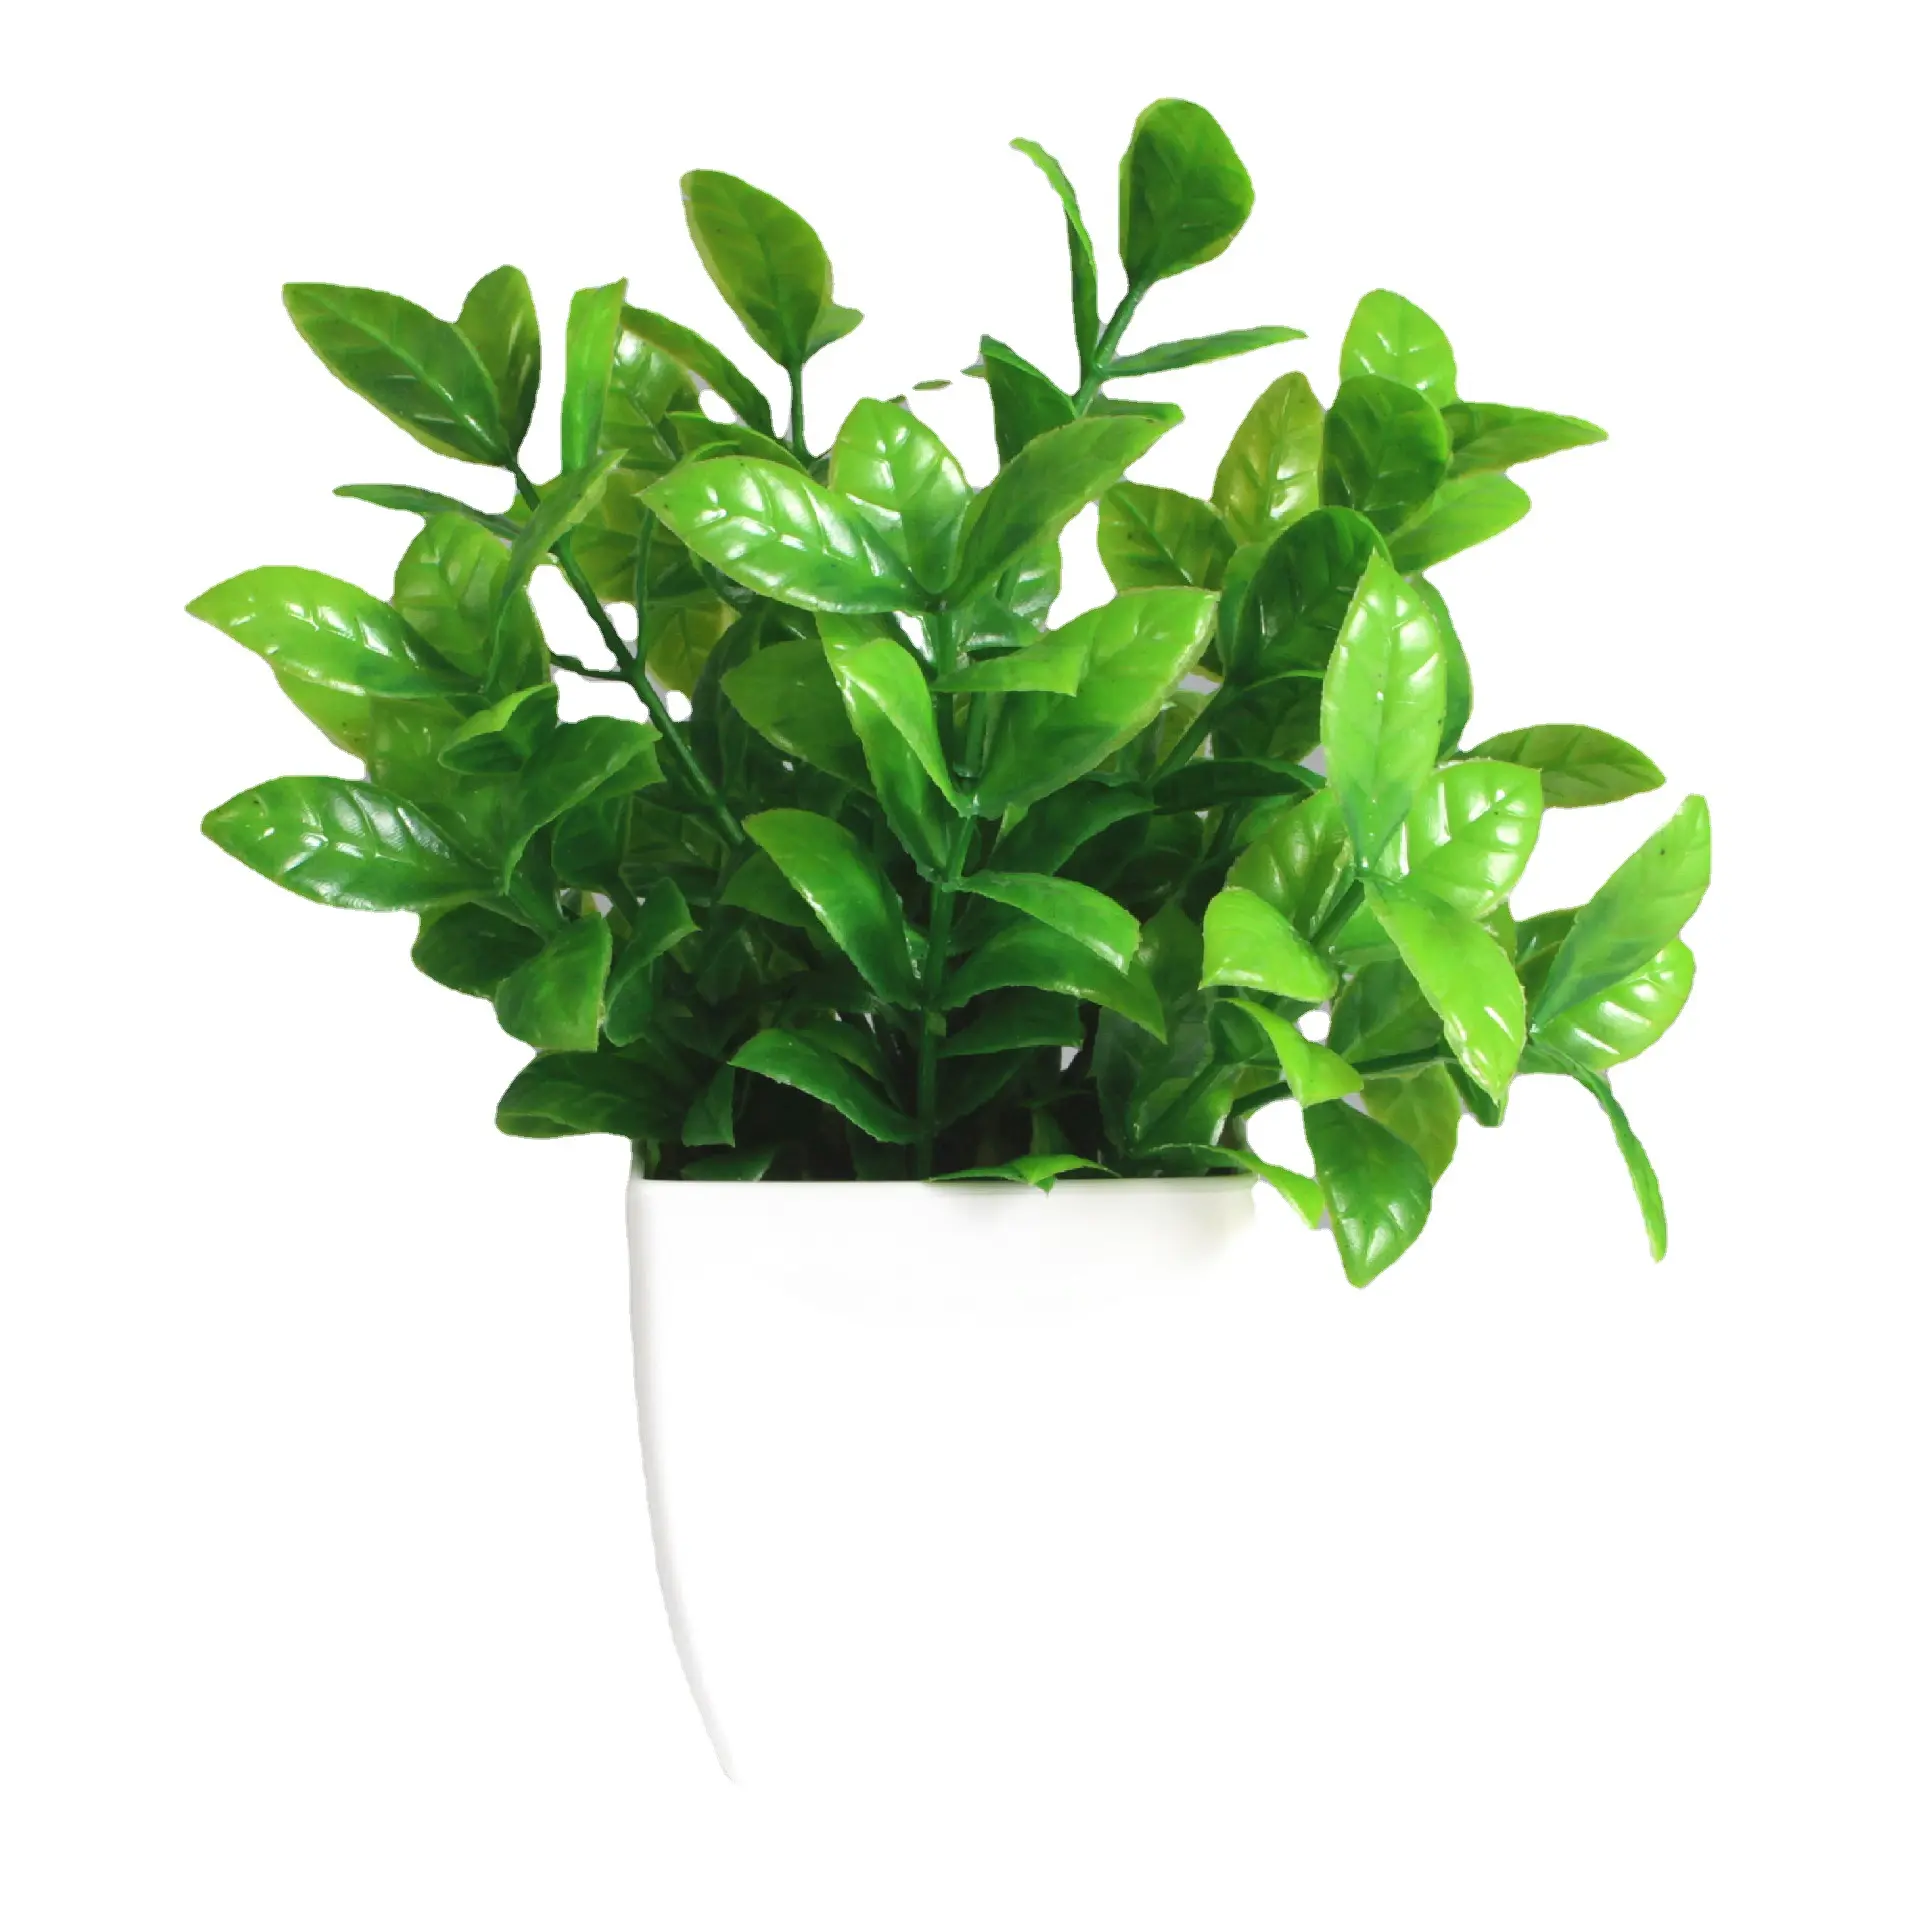 Indoor Small Artificial Plastic Potted bonsai Artificial Plants in Mini Pots for Home Office Decor